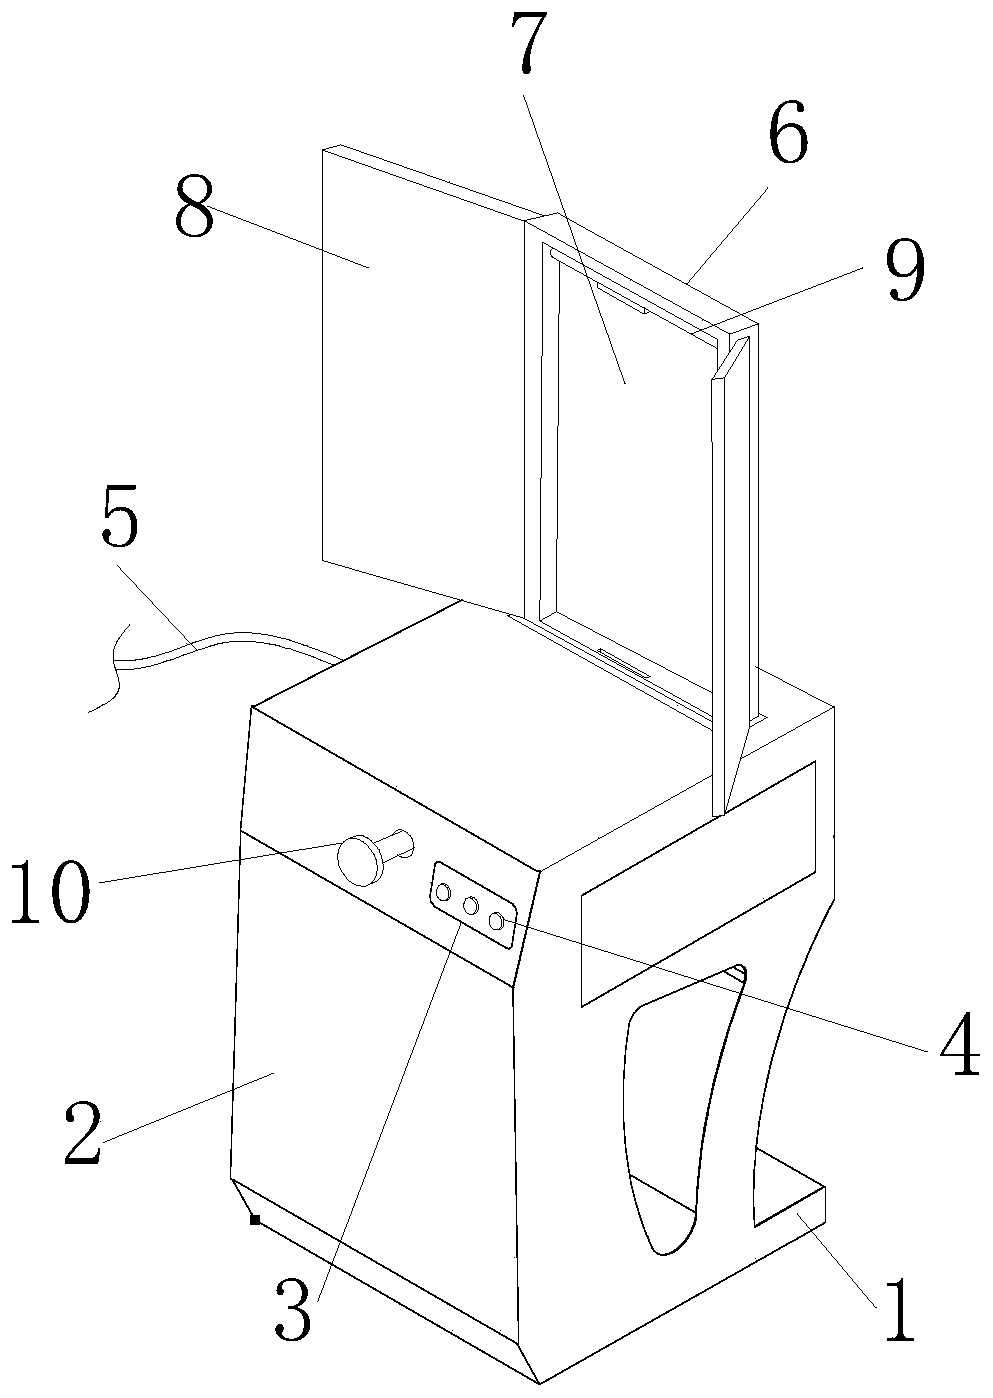 Multidirectional display device for domestic advertisement design